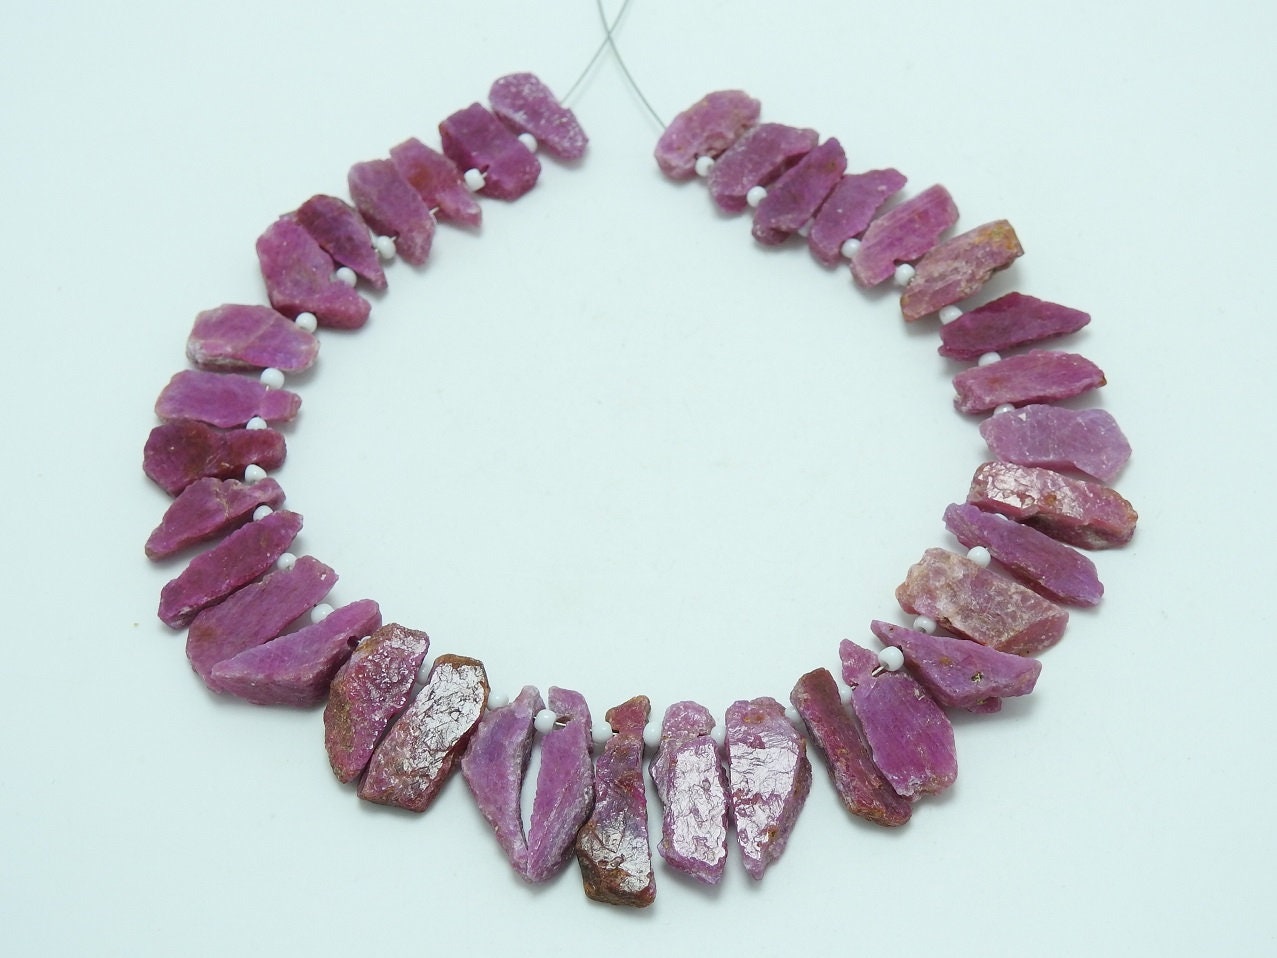 African Ruby Natural Chrystal Rough Slice,Slab,Stick,Nuggets,Loose Raw,8Inchs Strand 18X10To15X6MM Approx,Wholesale Price,New Arrival R4 | Save 33% - Rajasthan Living 15